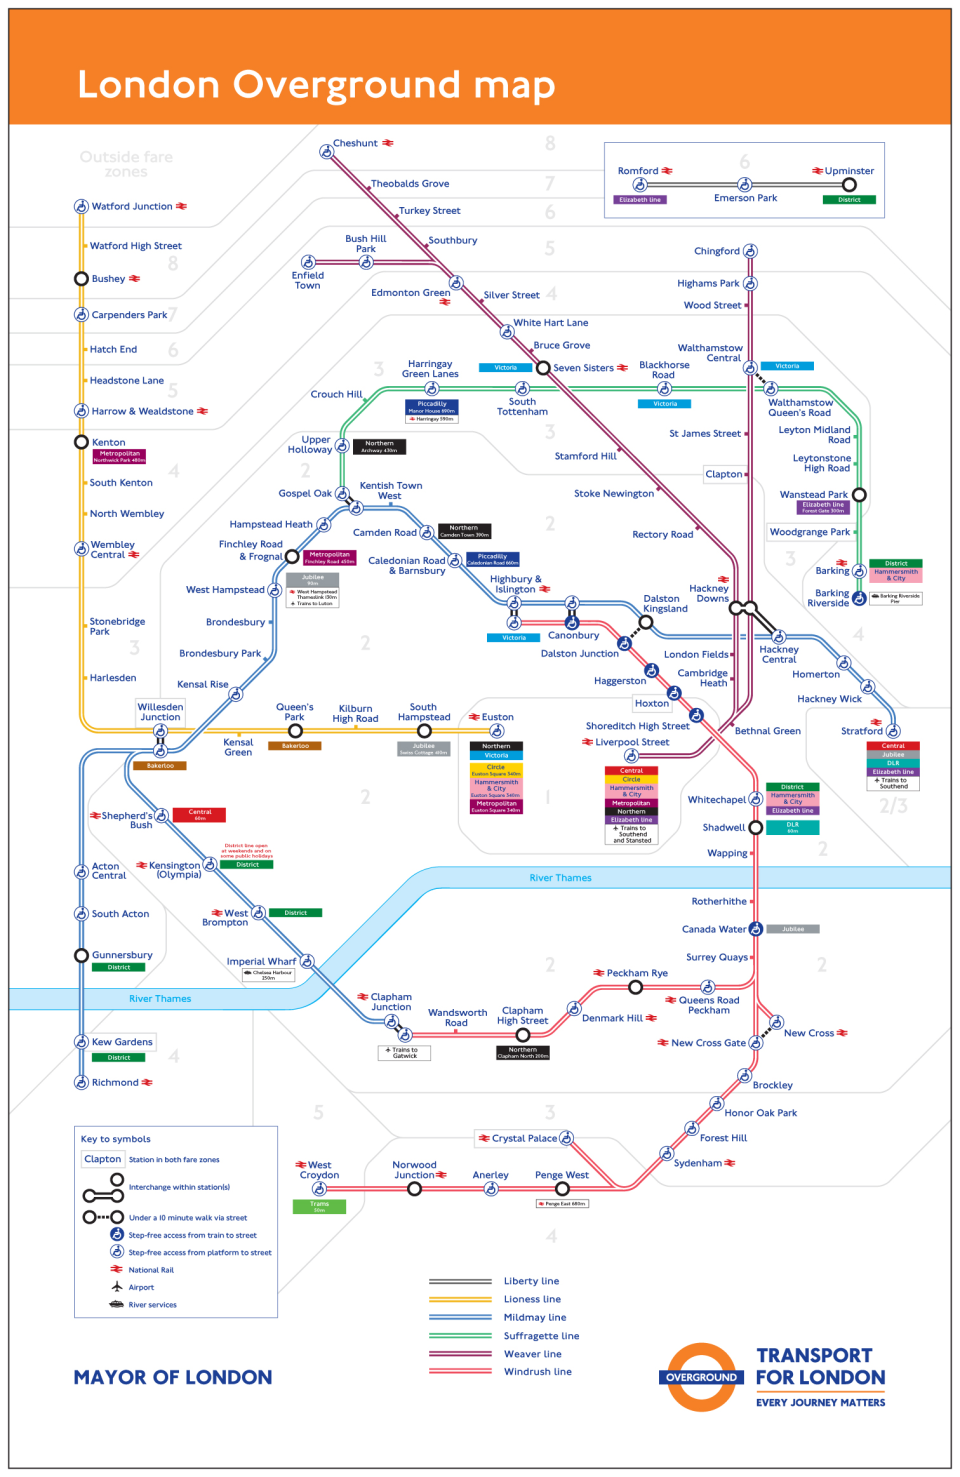 HOW THE NEW LONDON OVERGROUND MAP WILL LOOK (TfL)